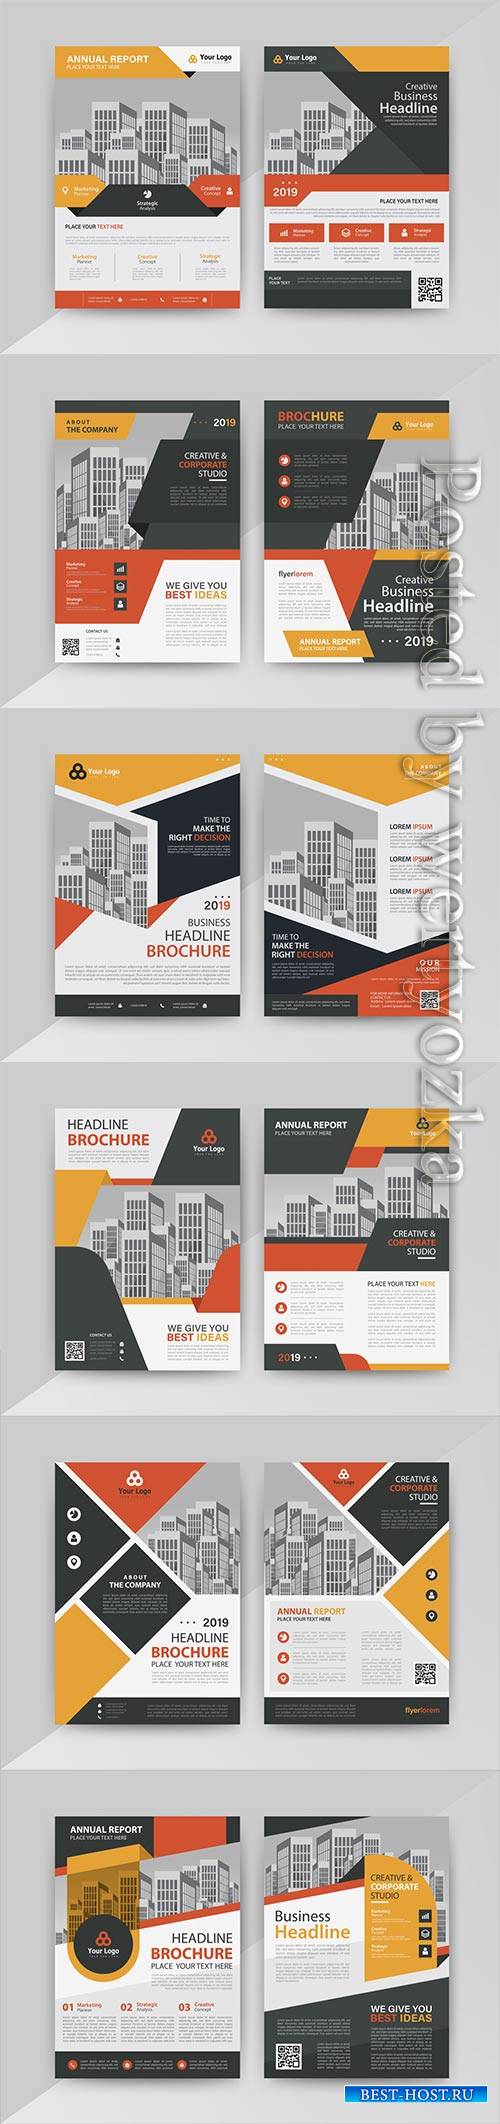 Business vector template for brochure, annual report, magazine # 23